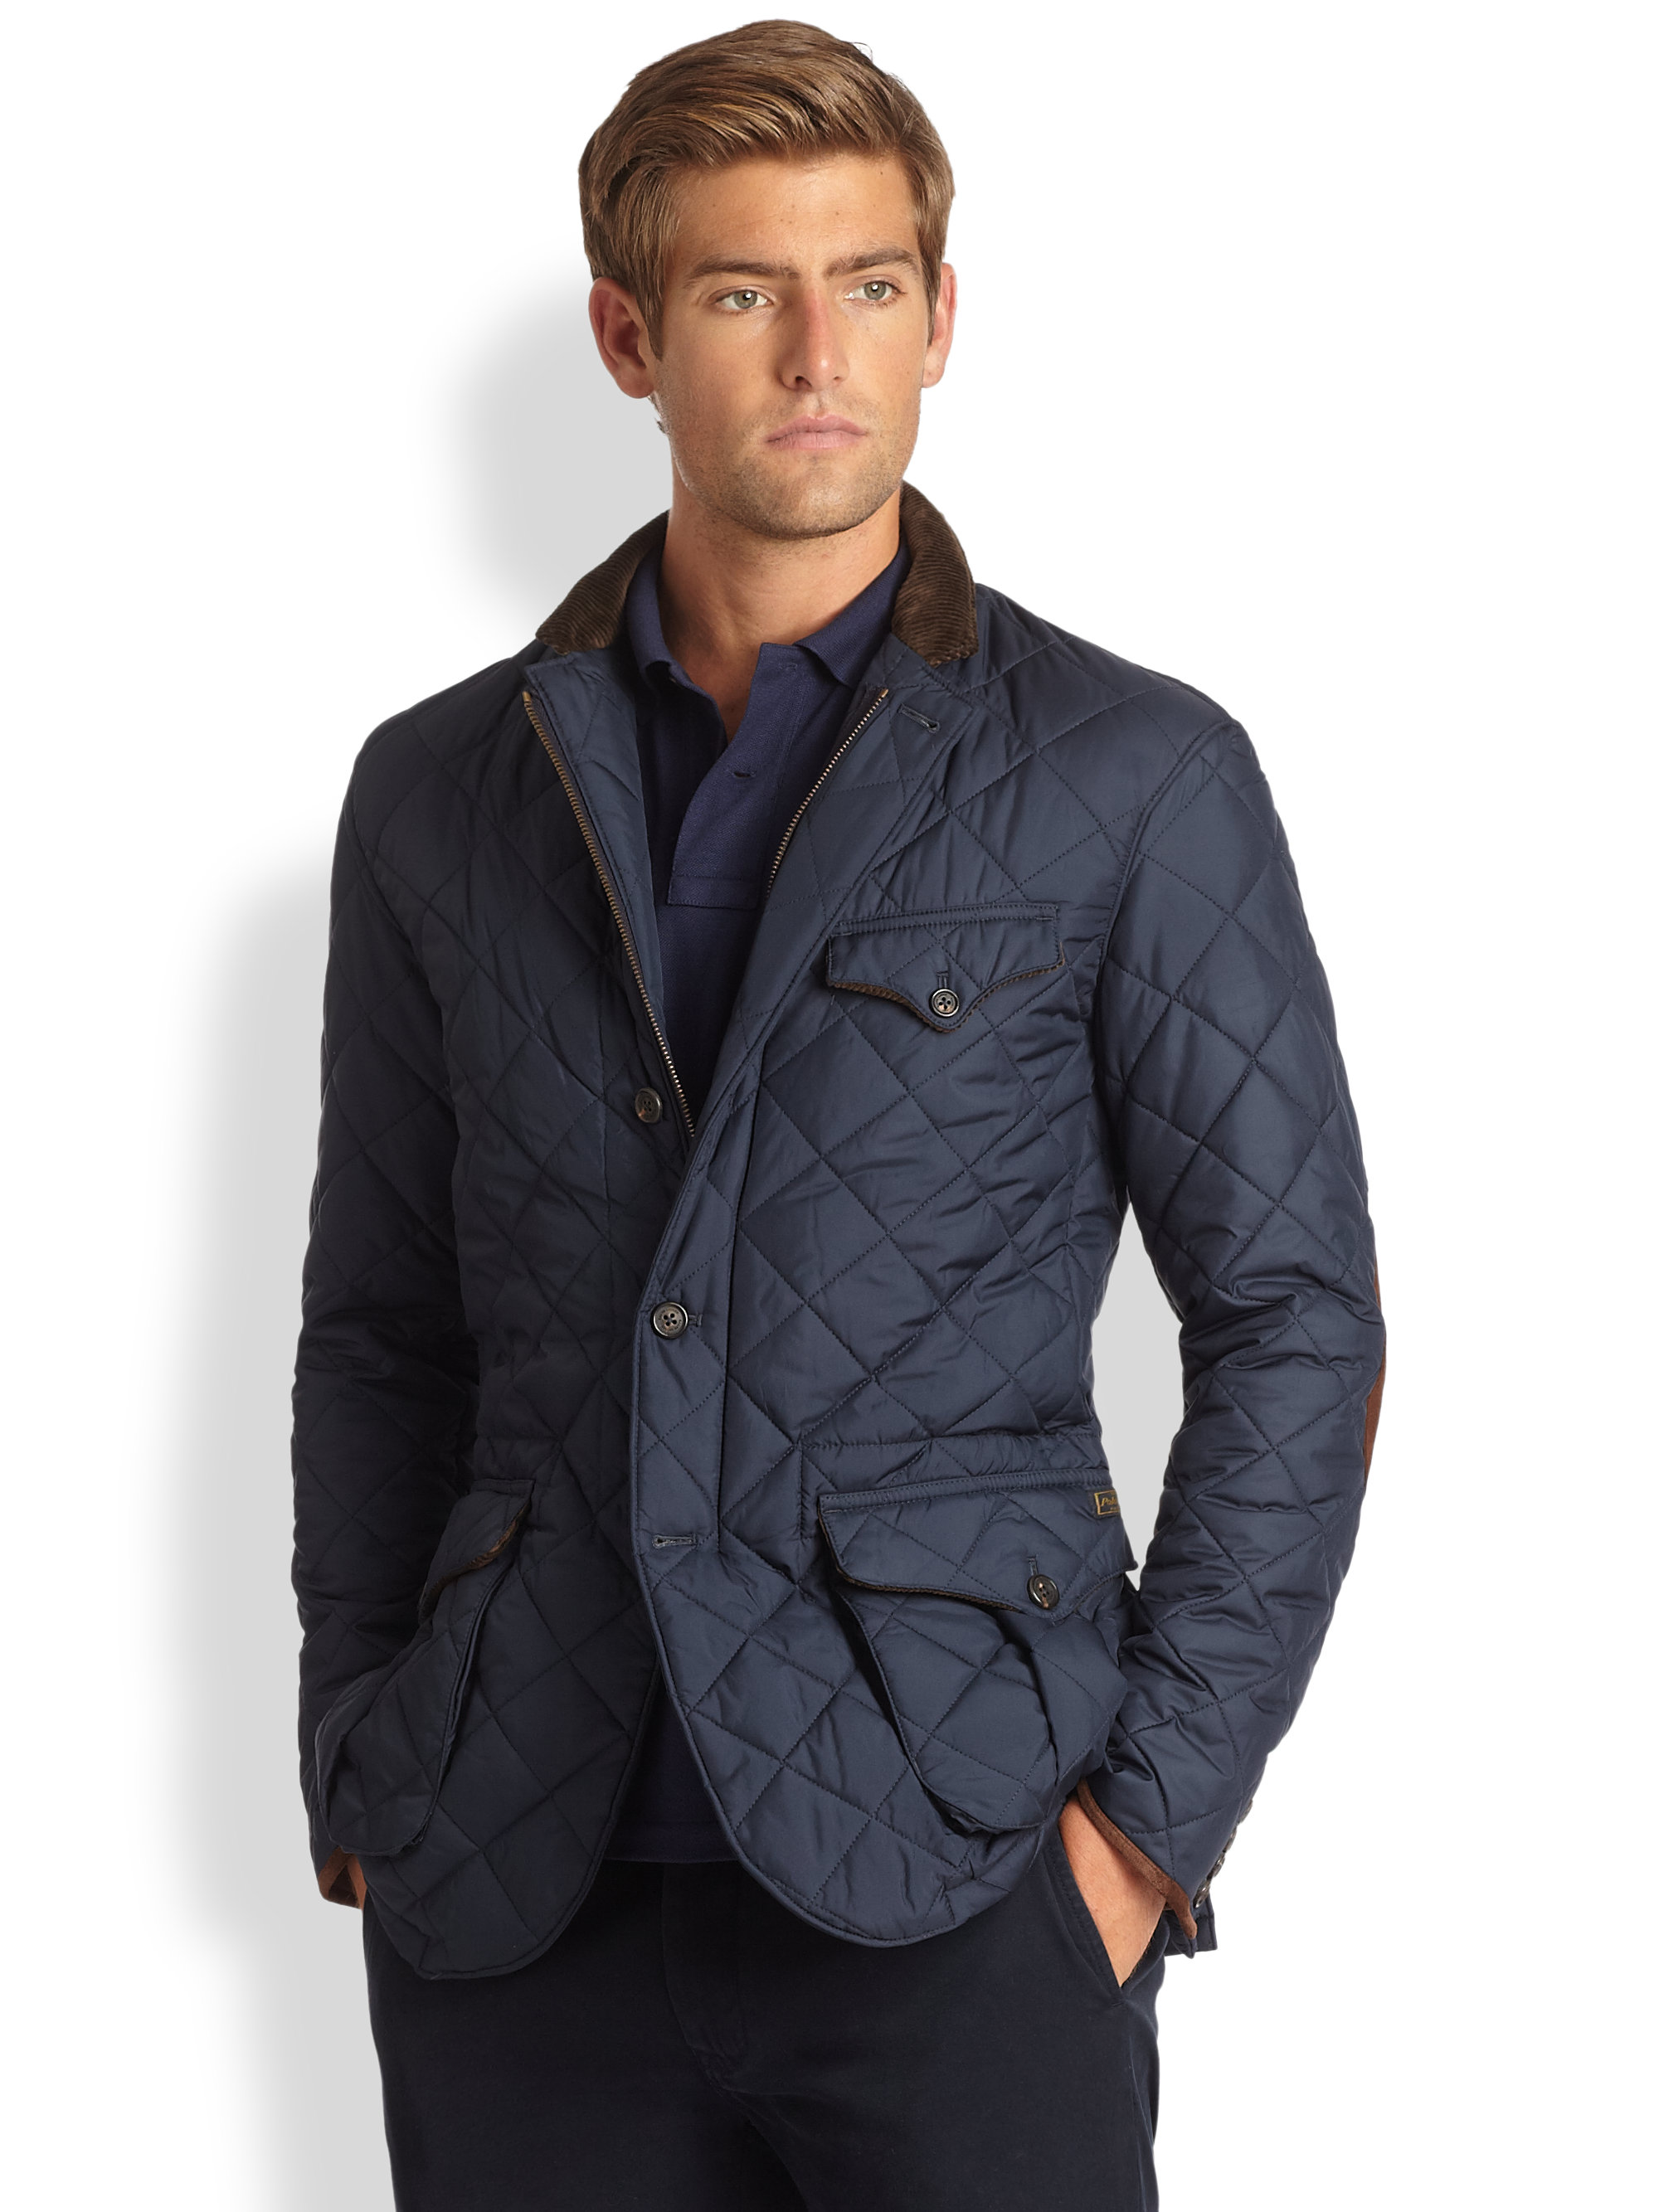 Polo Ralph Lauren Quilted Sportcoat in Blue for Men - Lyst